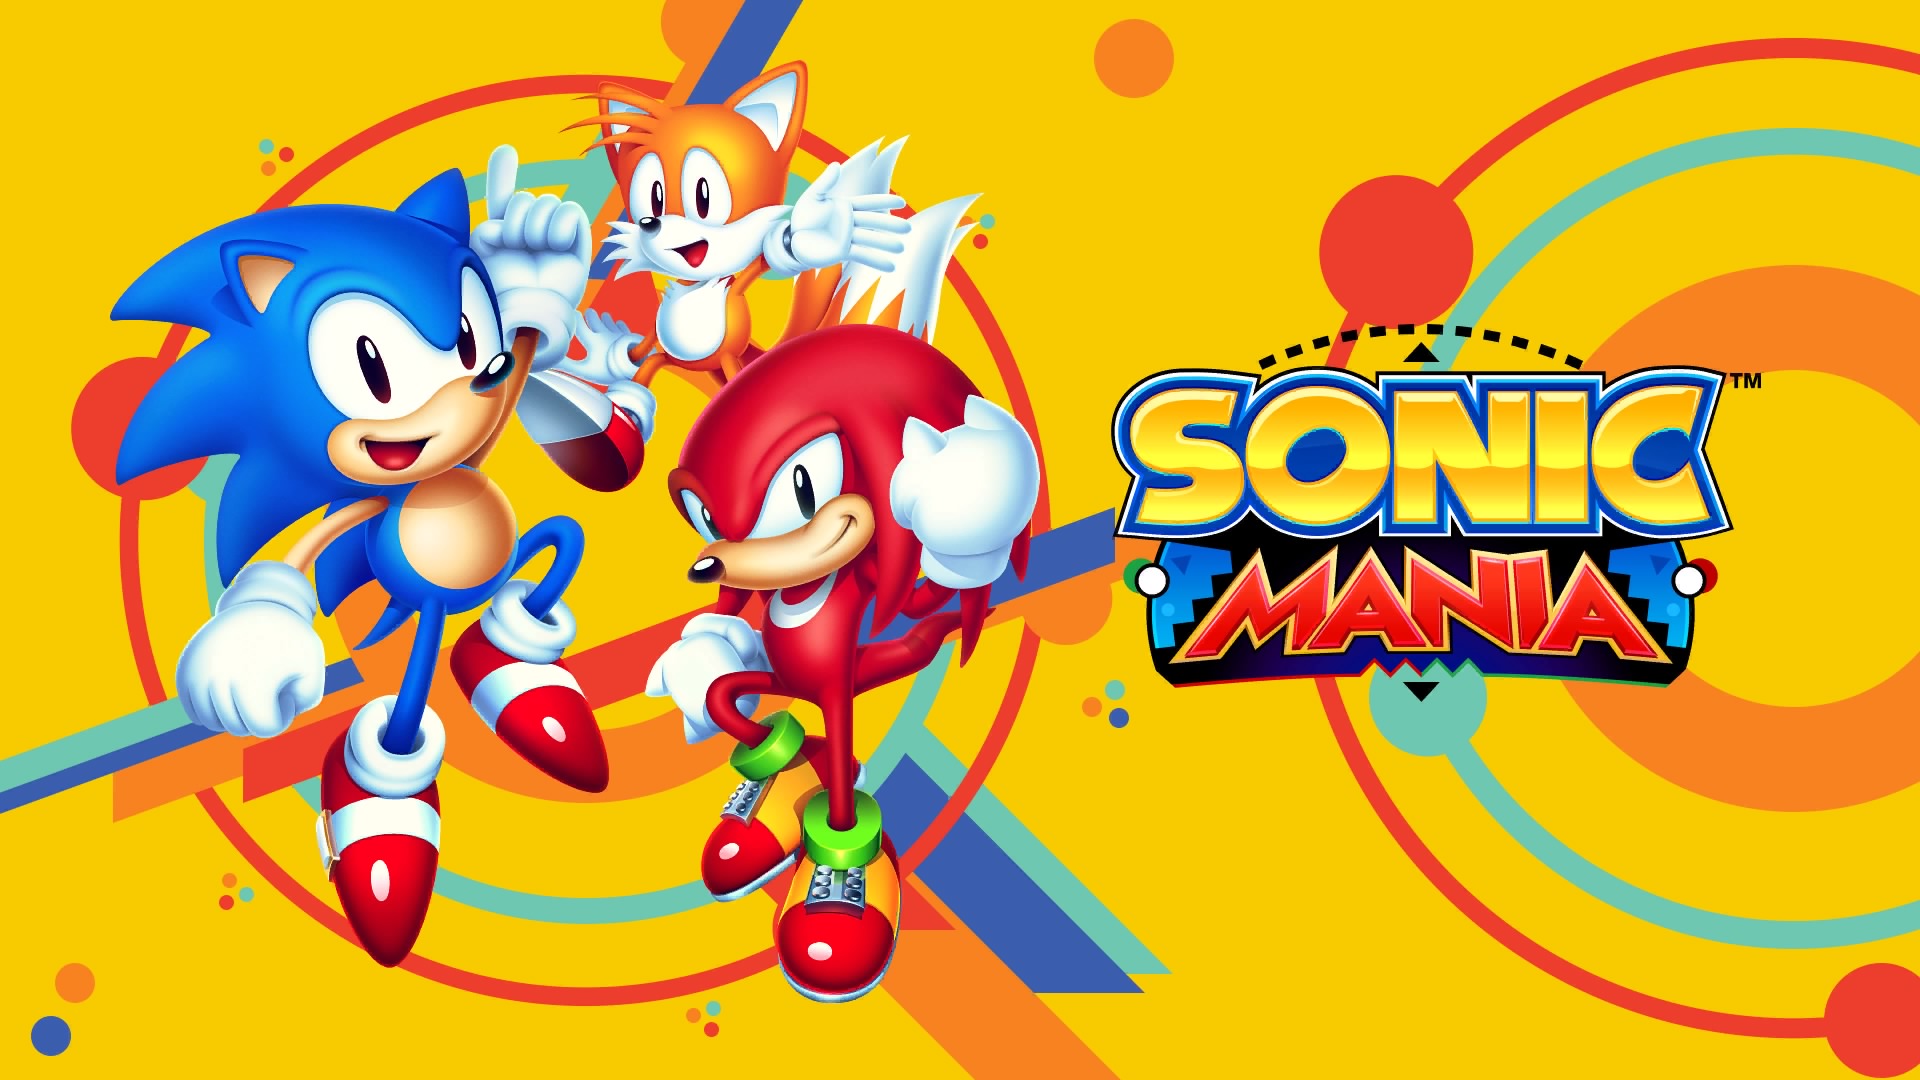 Sonic Sonic The Hedgehog Sonic Mania Adventures Sonic Mania Sega Mighty Tails Character Knuckles Com 1920x1080